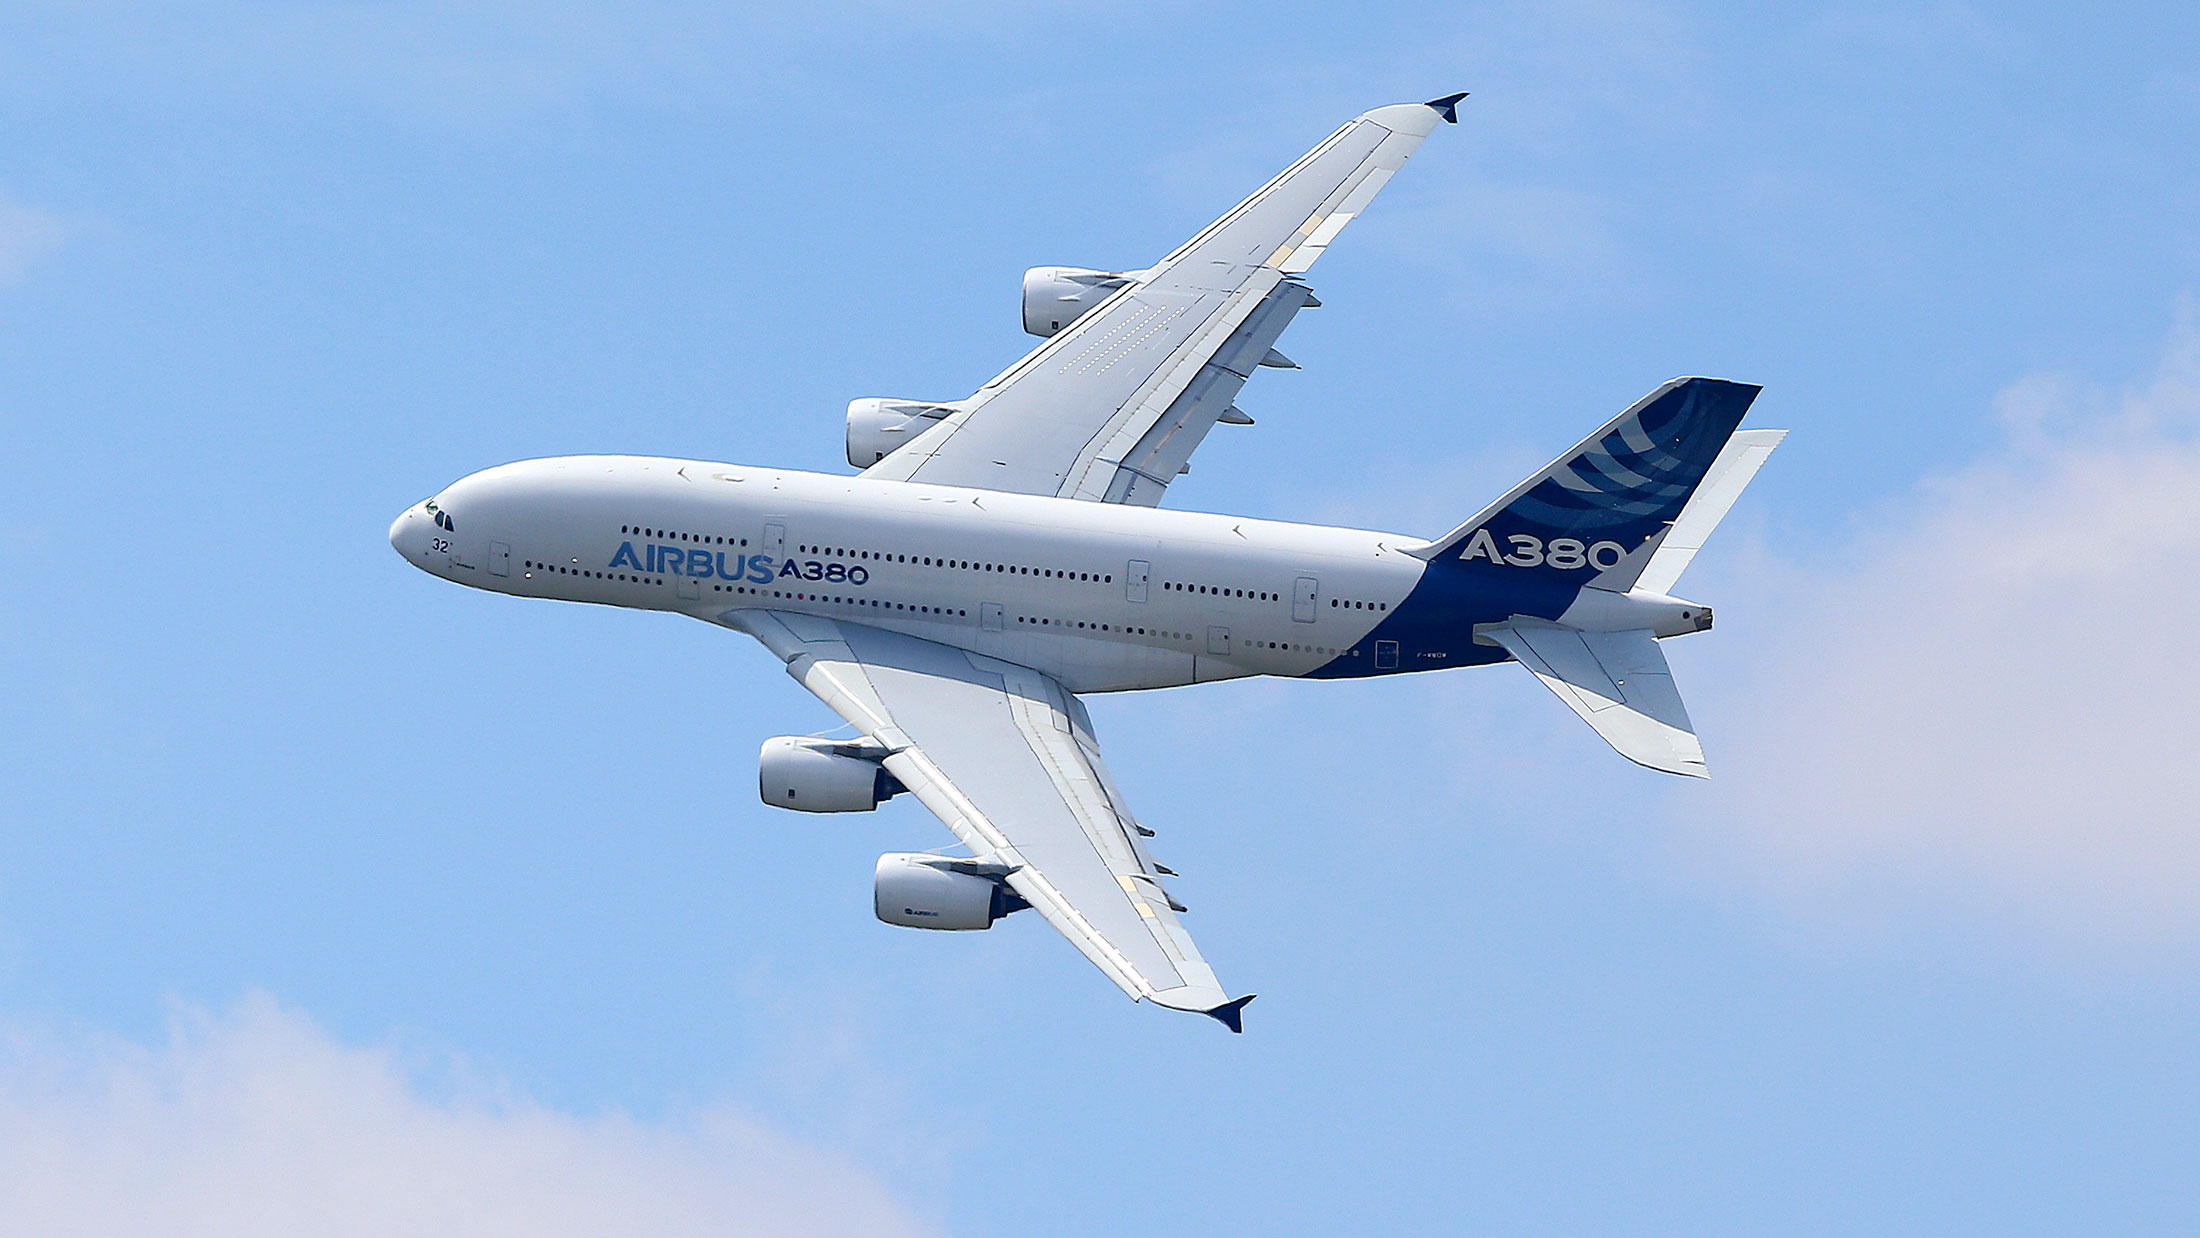 An Airbus SAS A380 super jumbo performs a flying display on day two of the 51st International Paris Air Show in Paris, France, on June 16, 2015.
